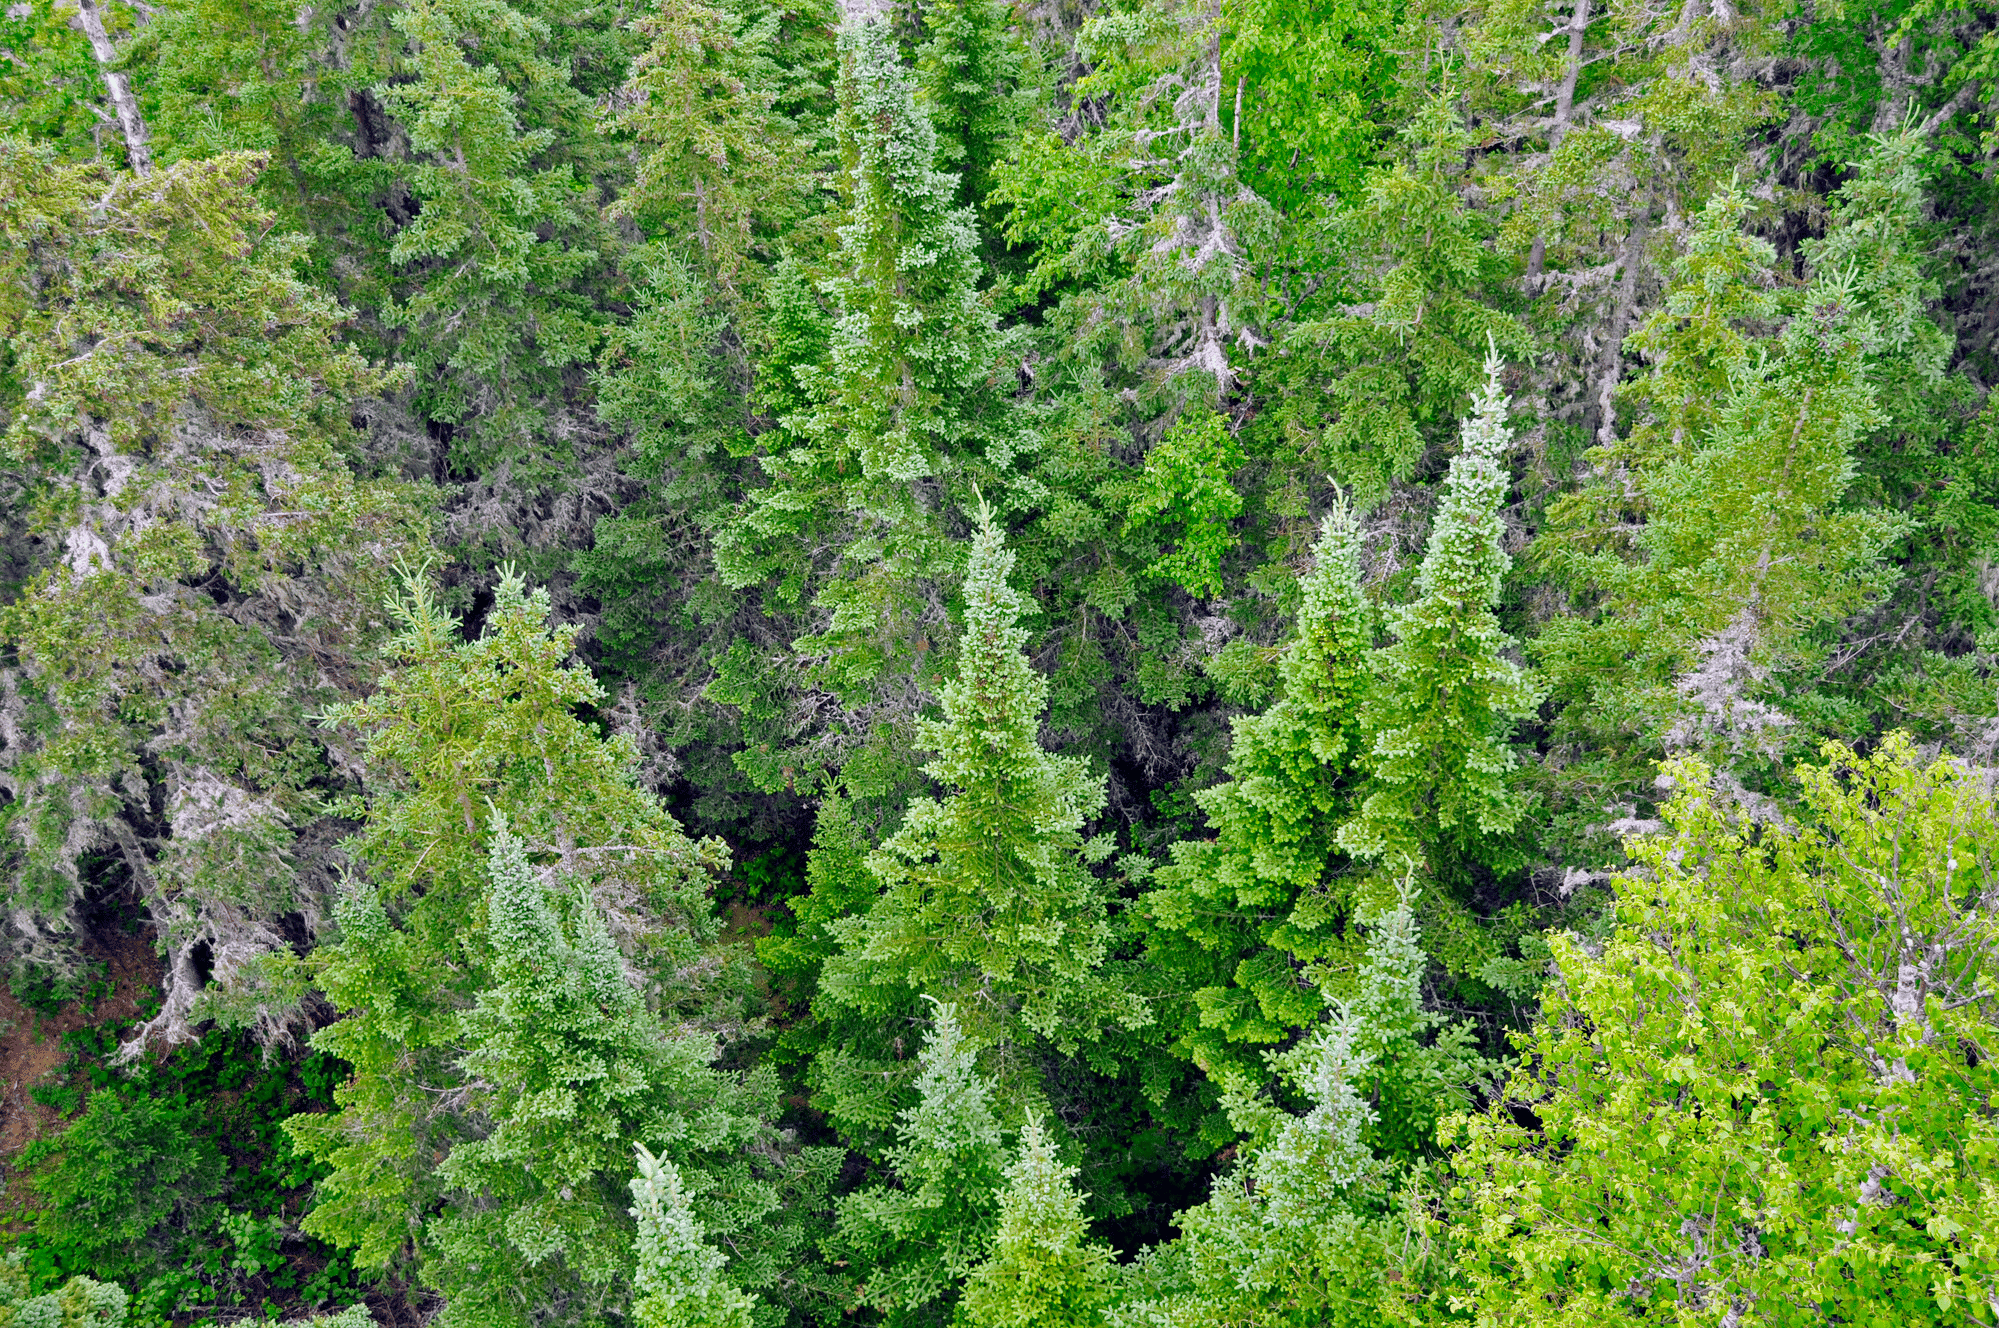 The forest of Isle Royale as seen from an overlook | Isle Royale National Park Facts